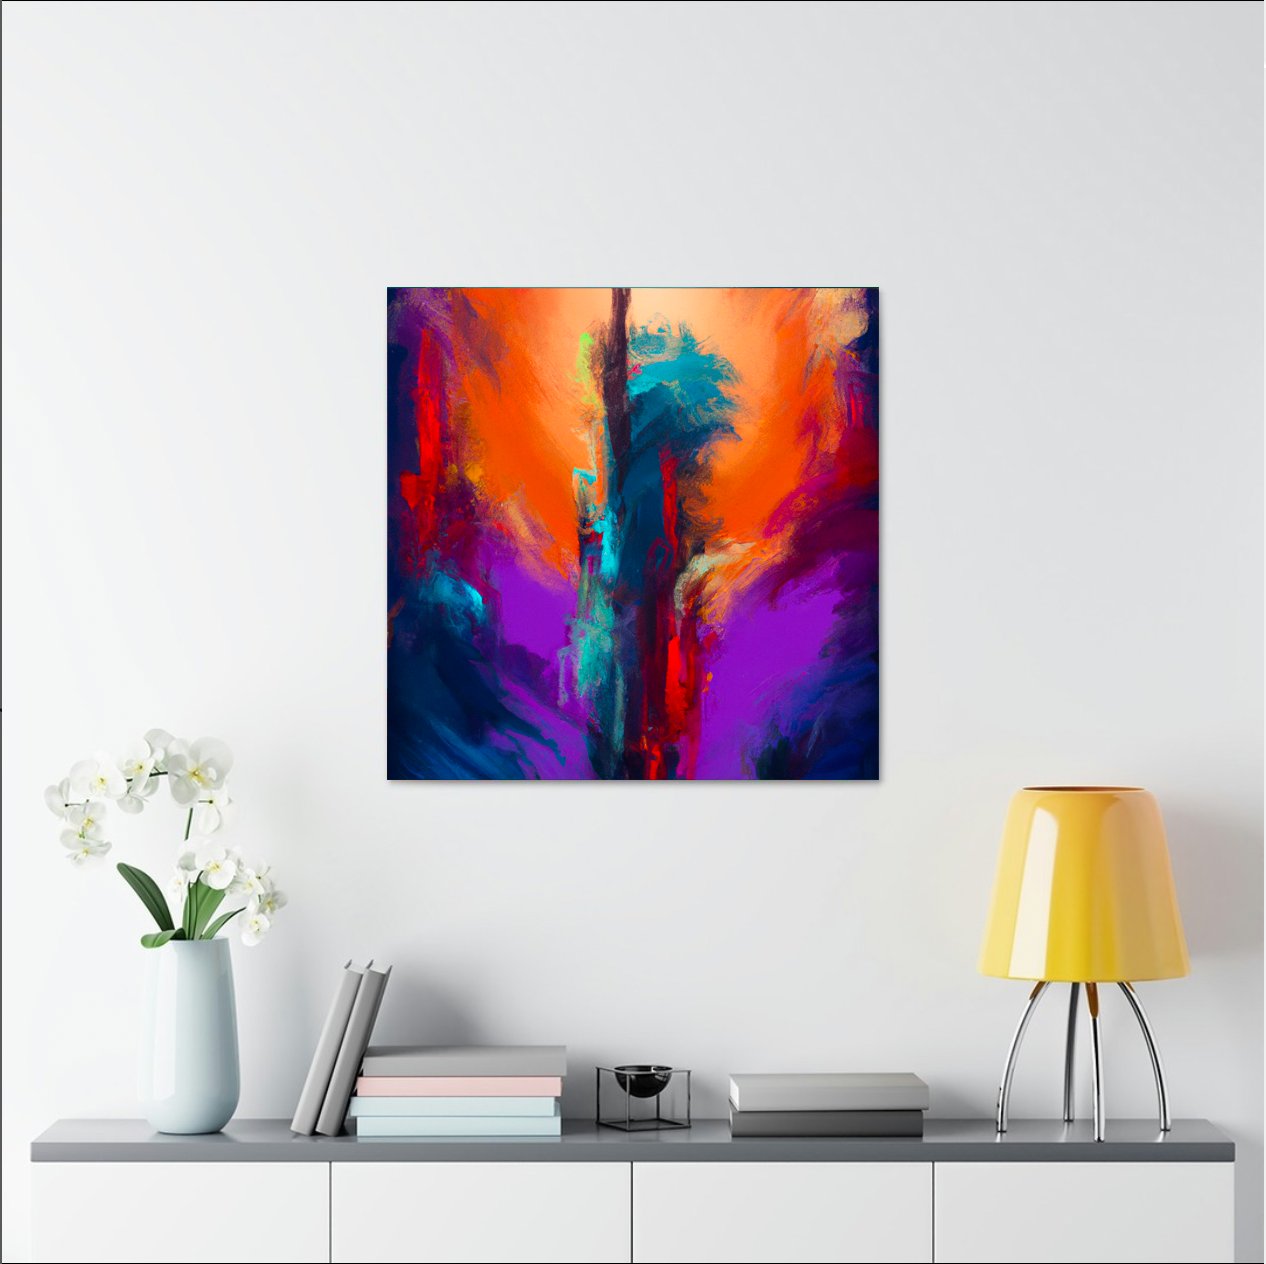 Vibrant Abstracts